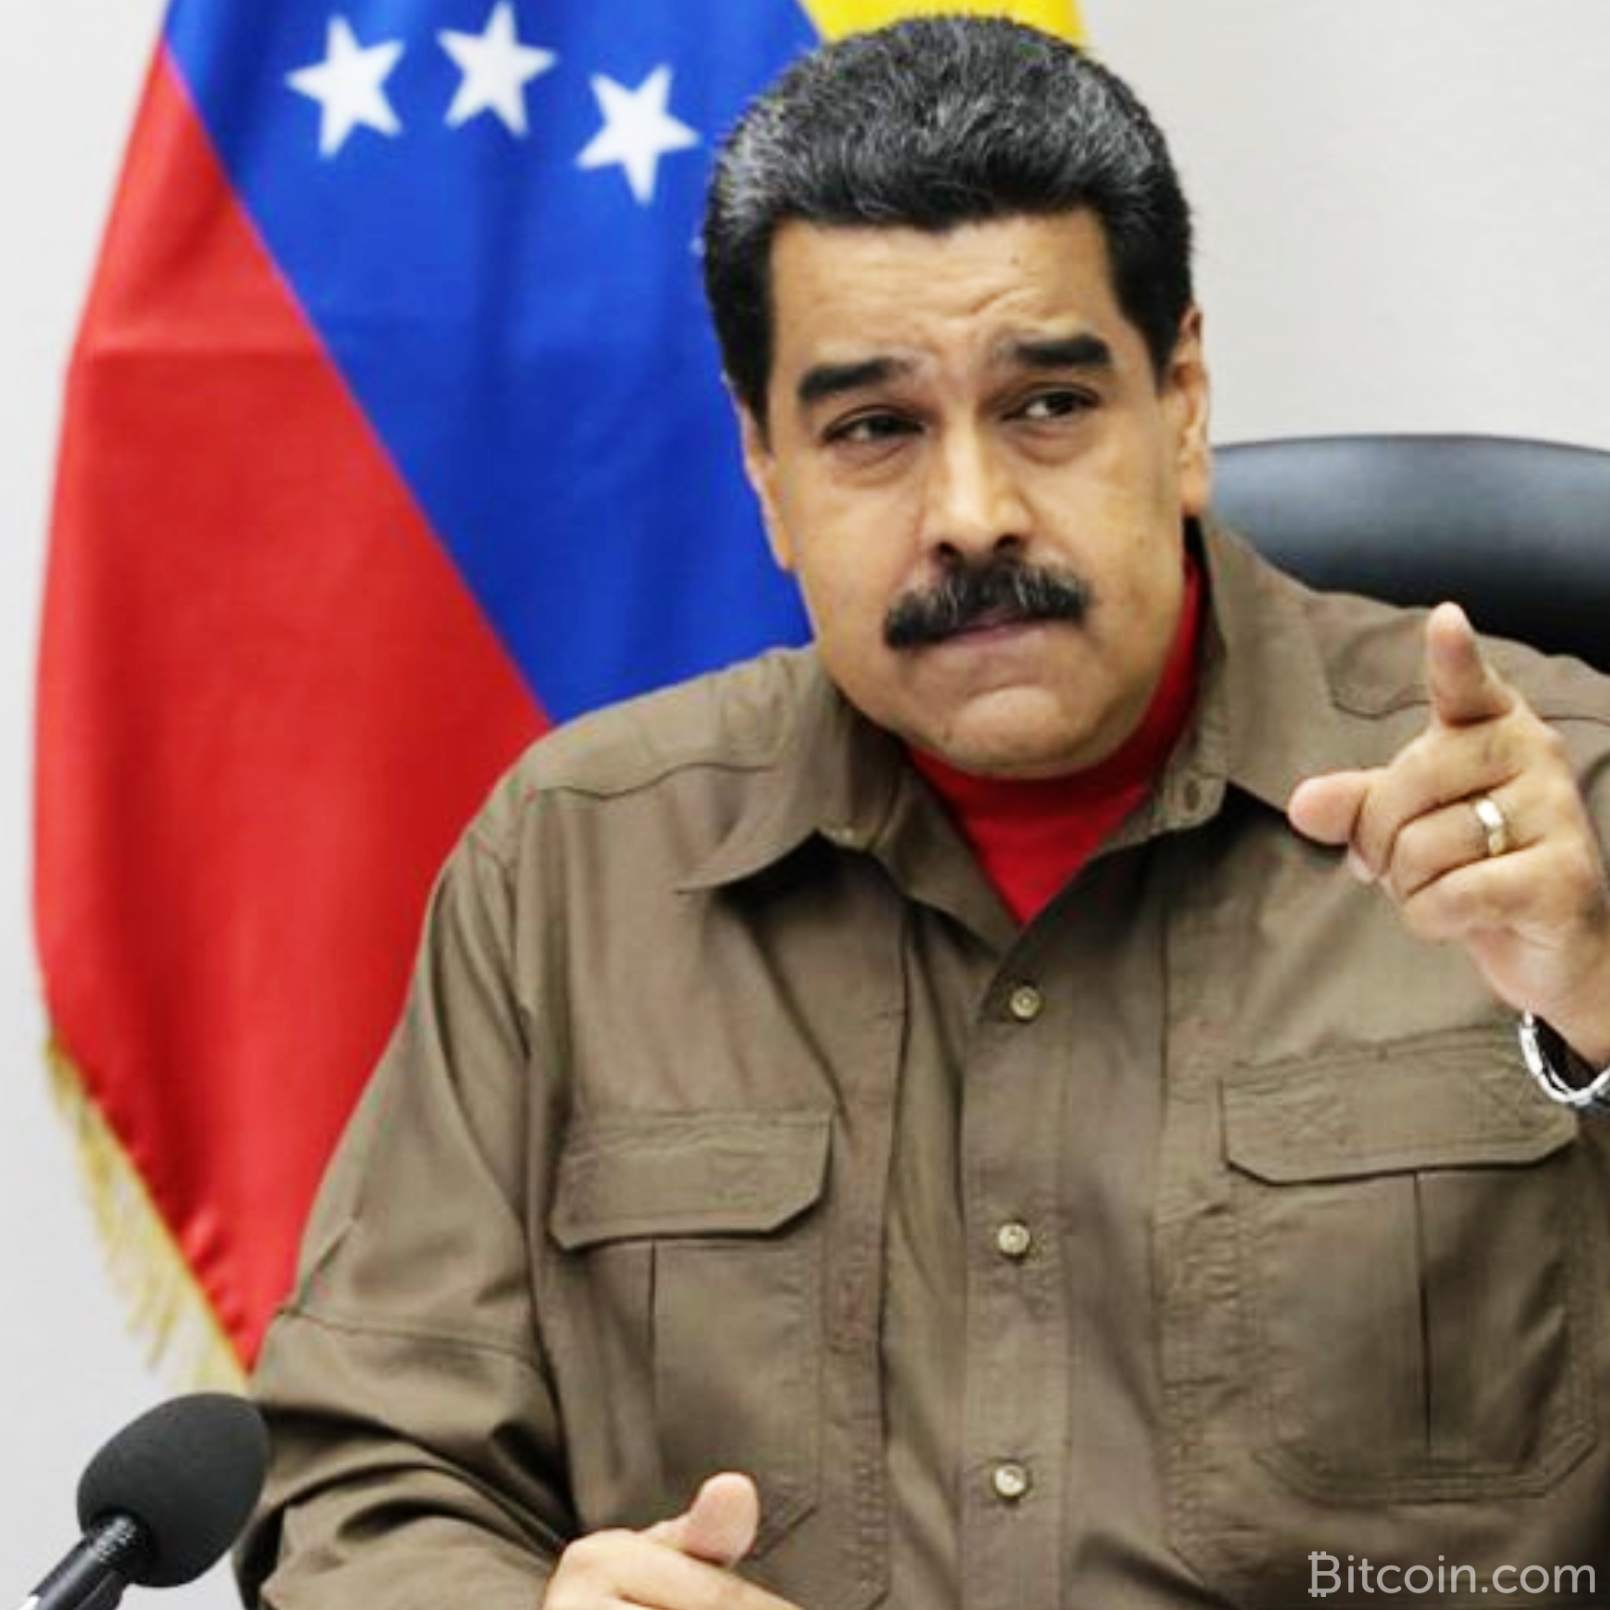 Maduro Orders the Issue of 100M Petros, Venezuela’s Oil-Backed Cryptocurrency